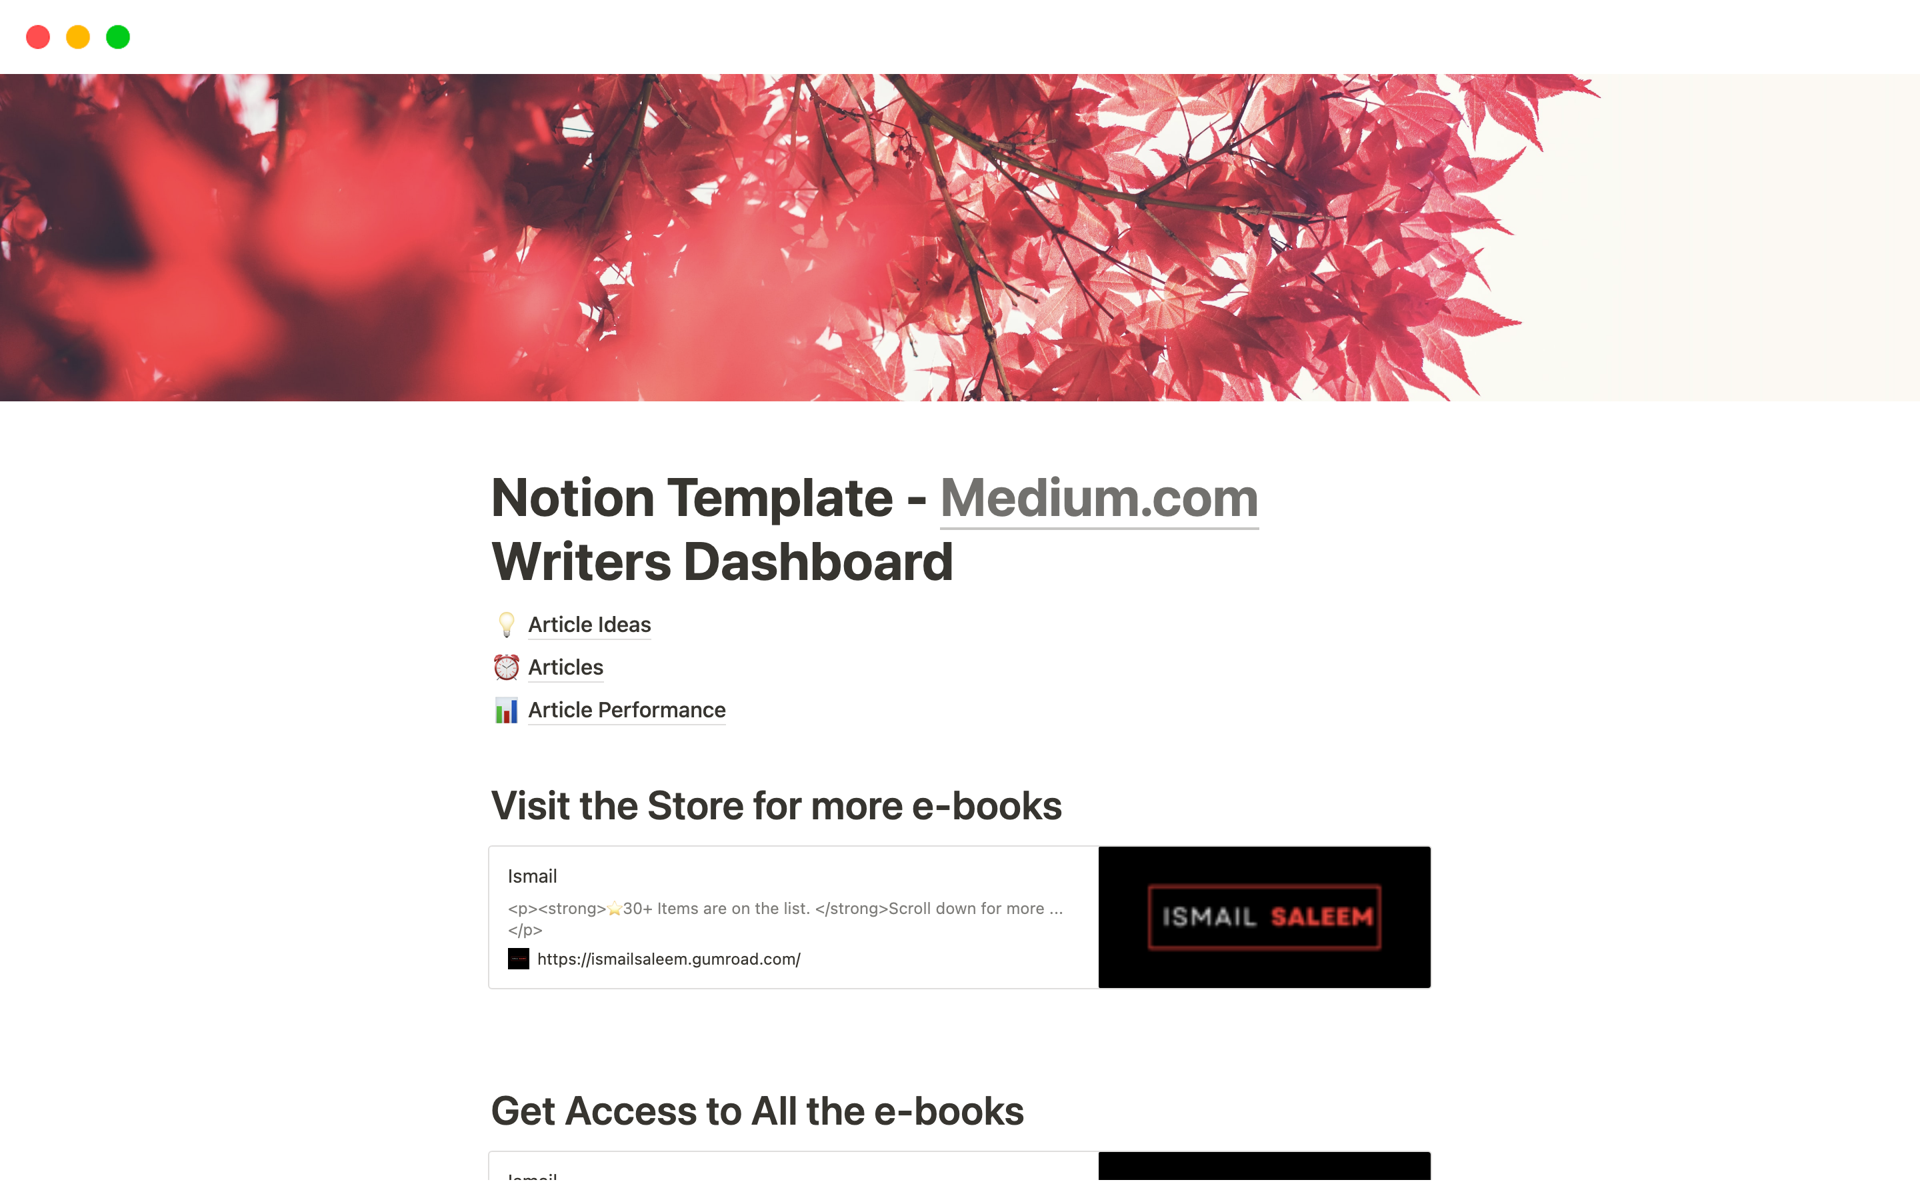 As a writer, staying organized and keeping track of your ideas and articles can be a challenging task. That’s why I have created a Notion template specifically for Medium.com writers, to help streamline their workflow and keep their ideas and articles organized. 

